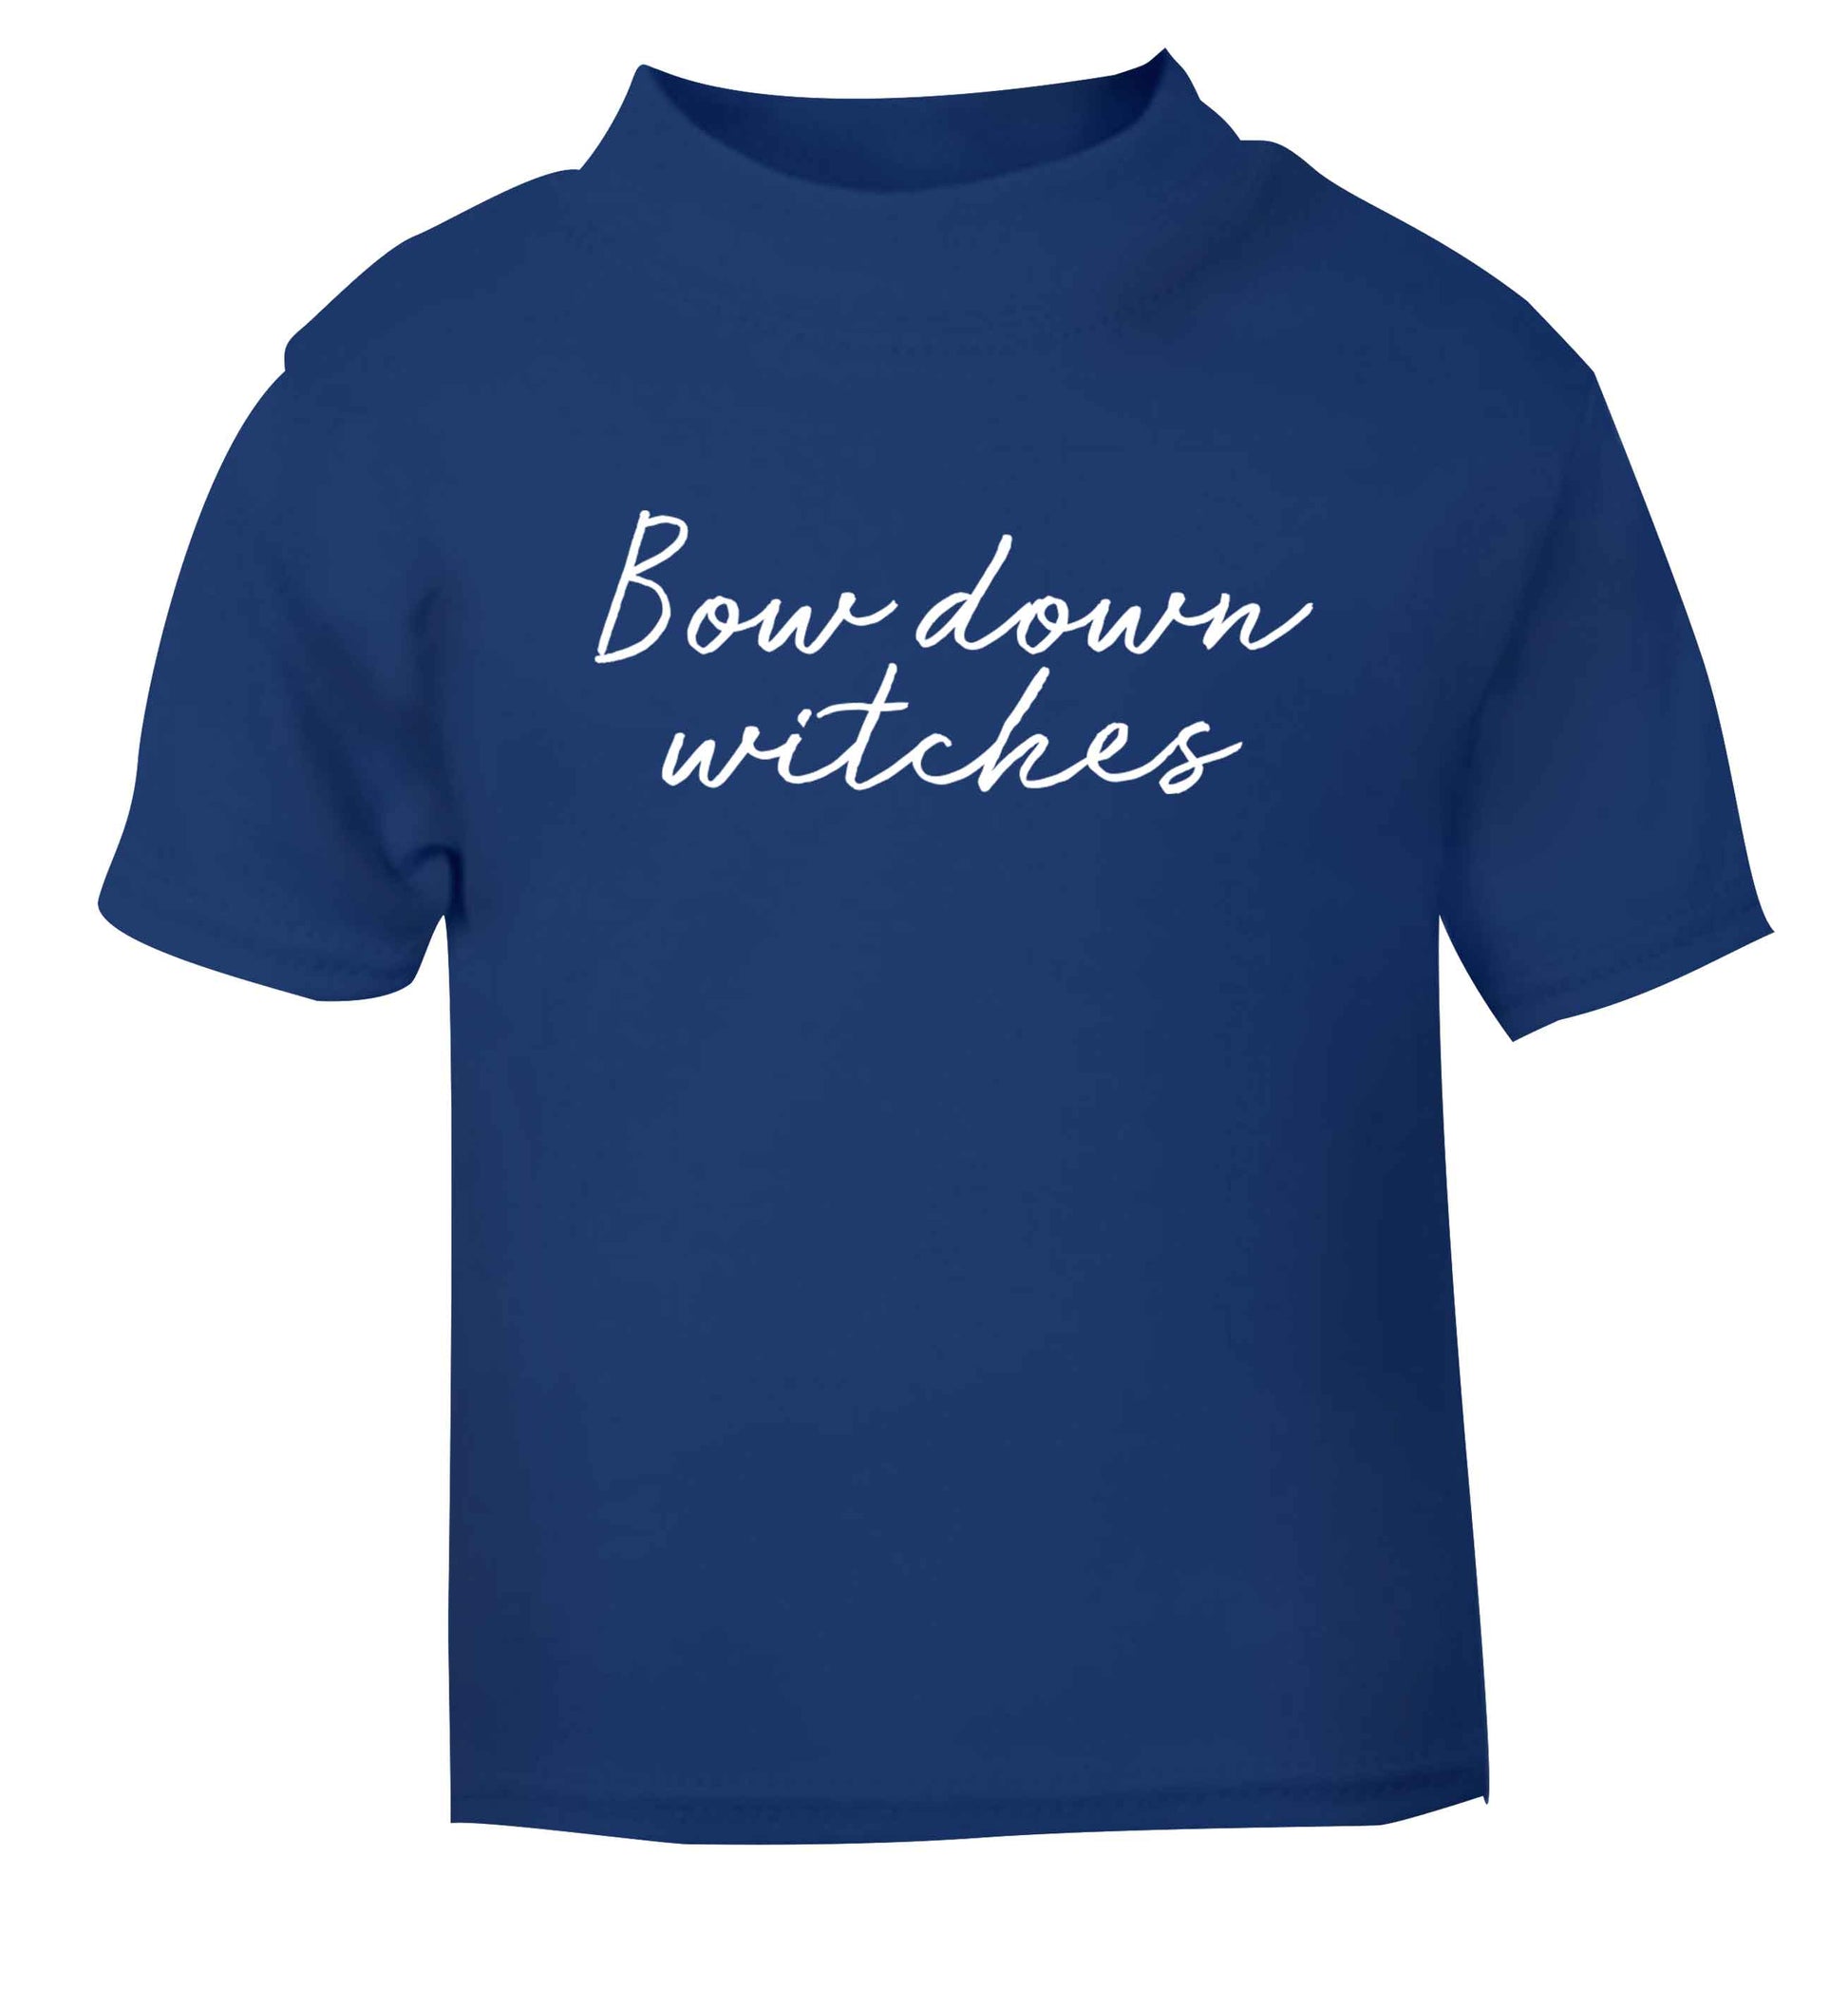 Bow down witches blue baby toddler Tshirt 2 Years